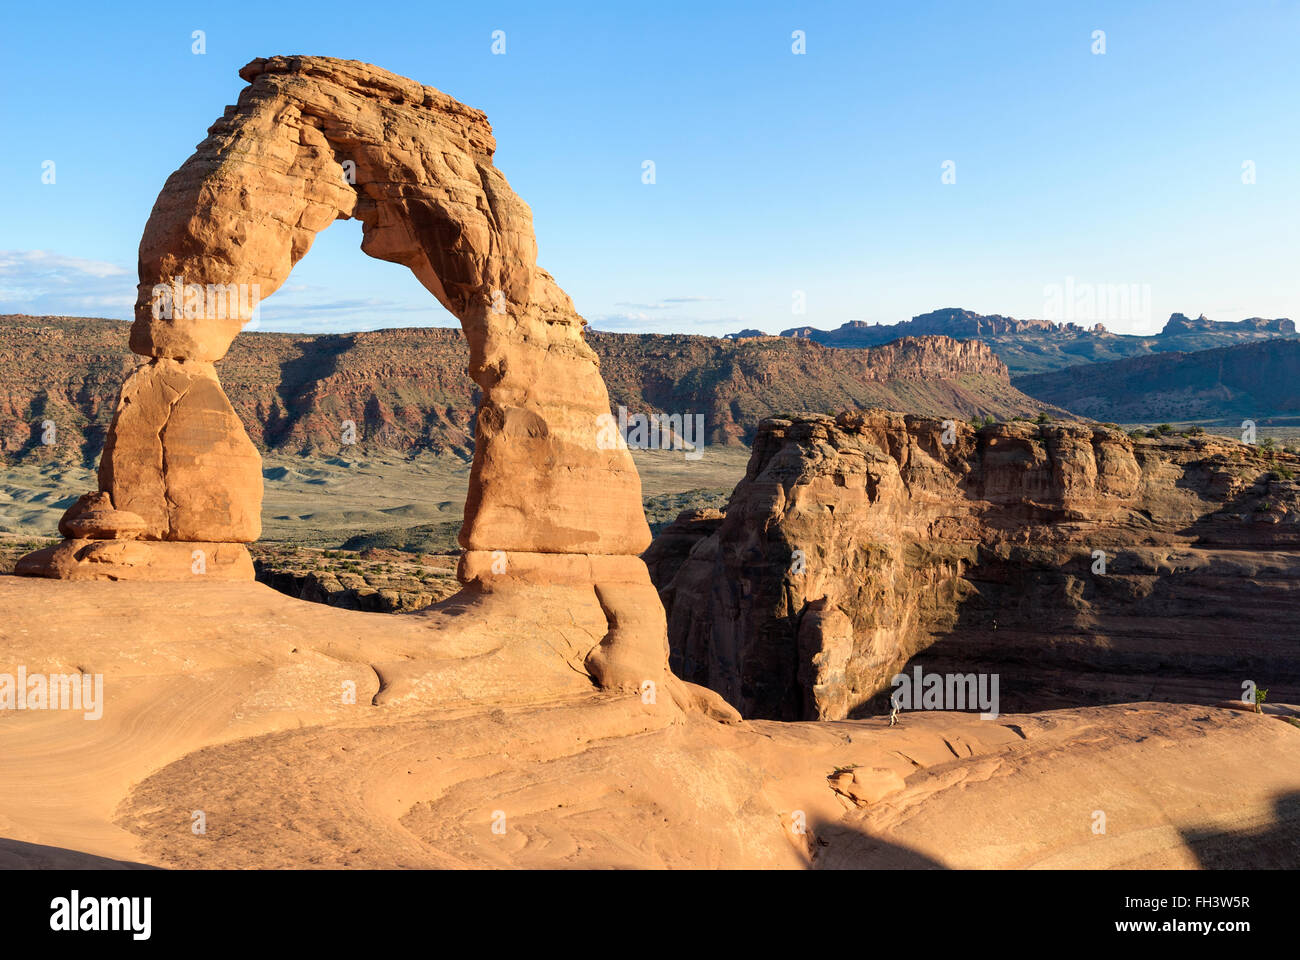 A tourist walks towards Delicate Arch in Arches National Park, Utah, USA Stock Photo